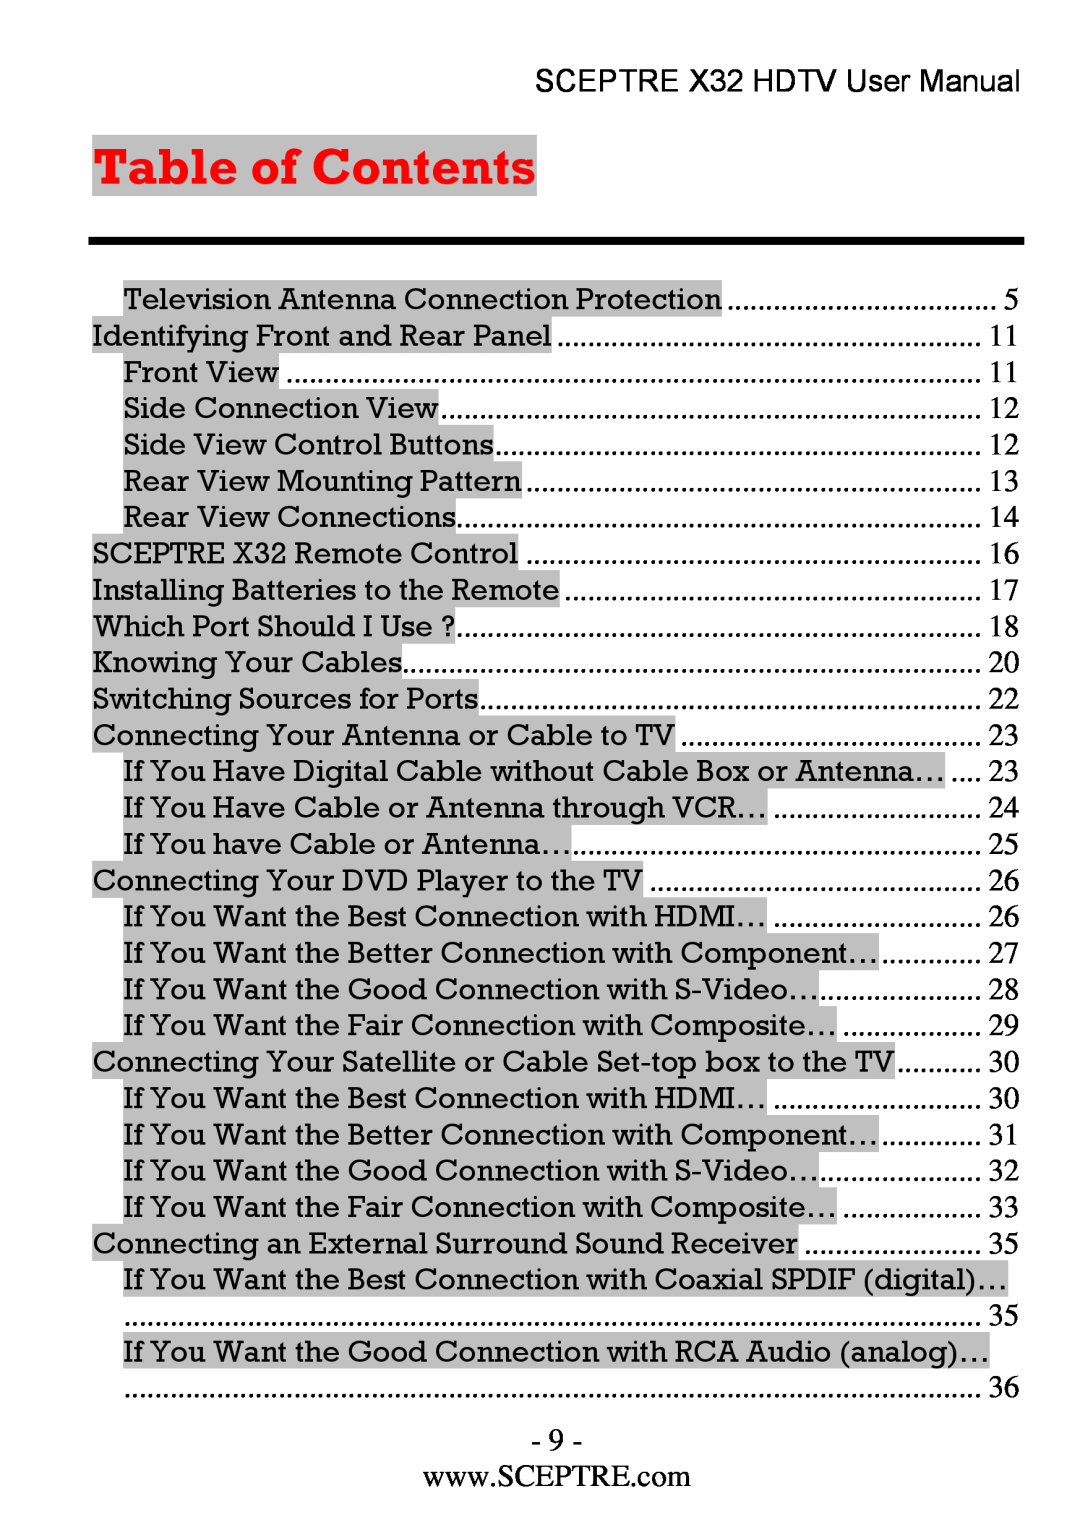 Sceptre Technologies x32 user manual Table of Contents, Connecting 